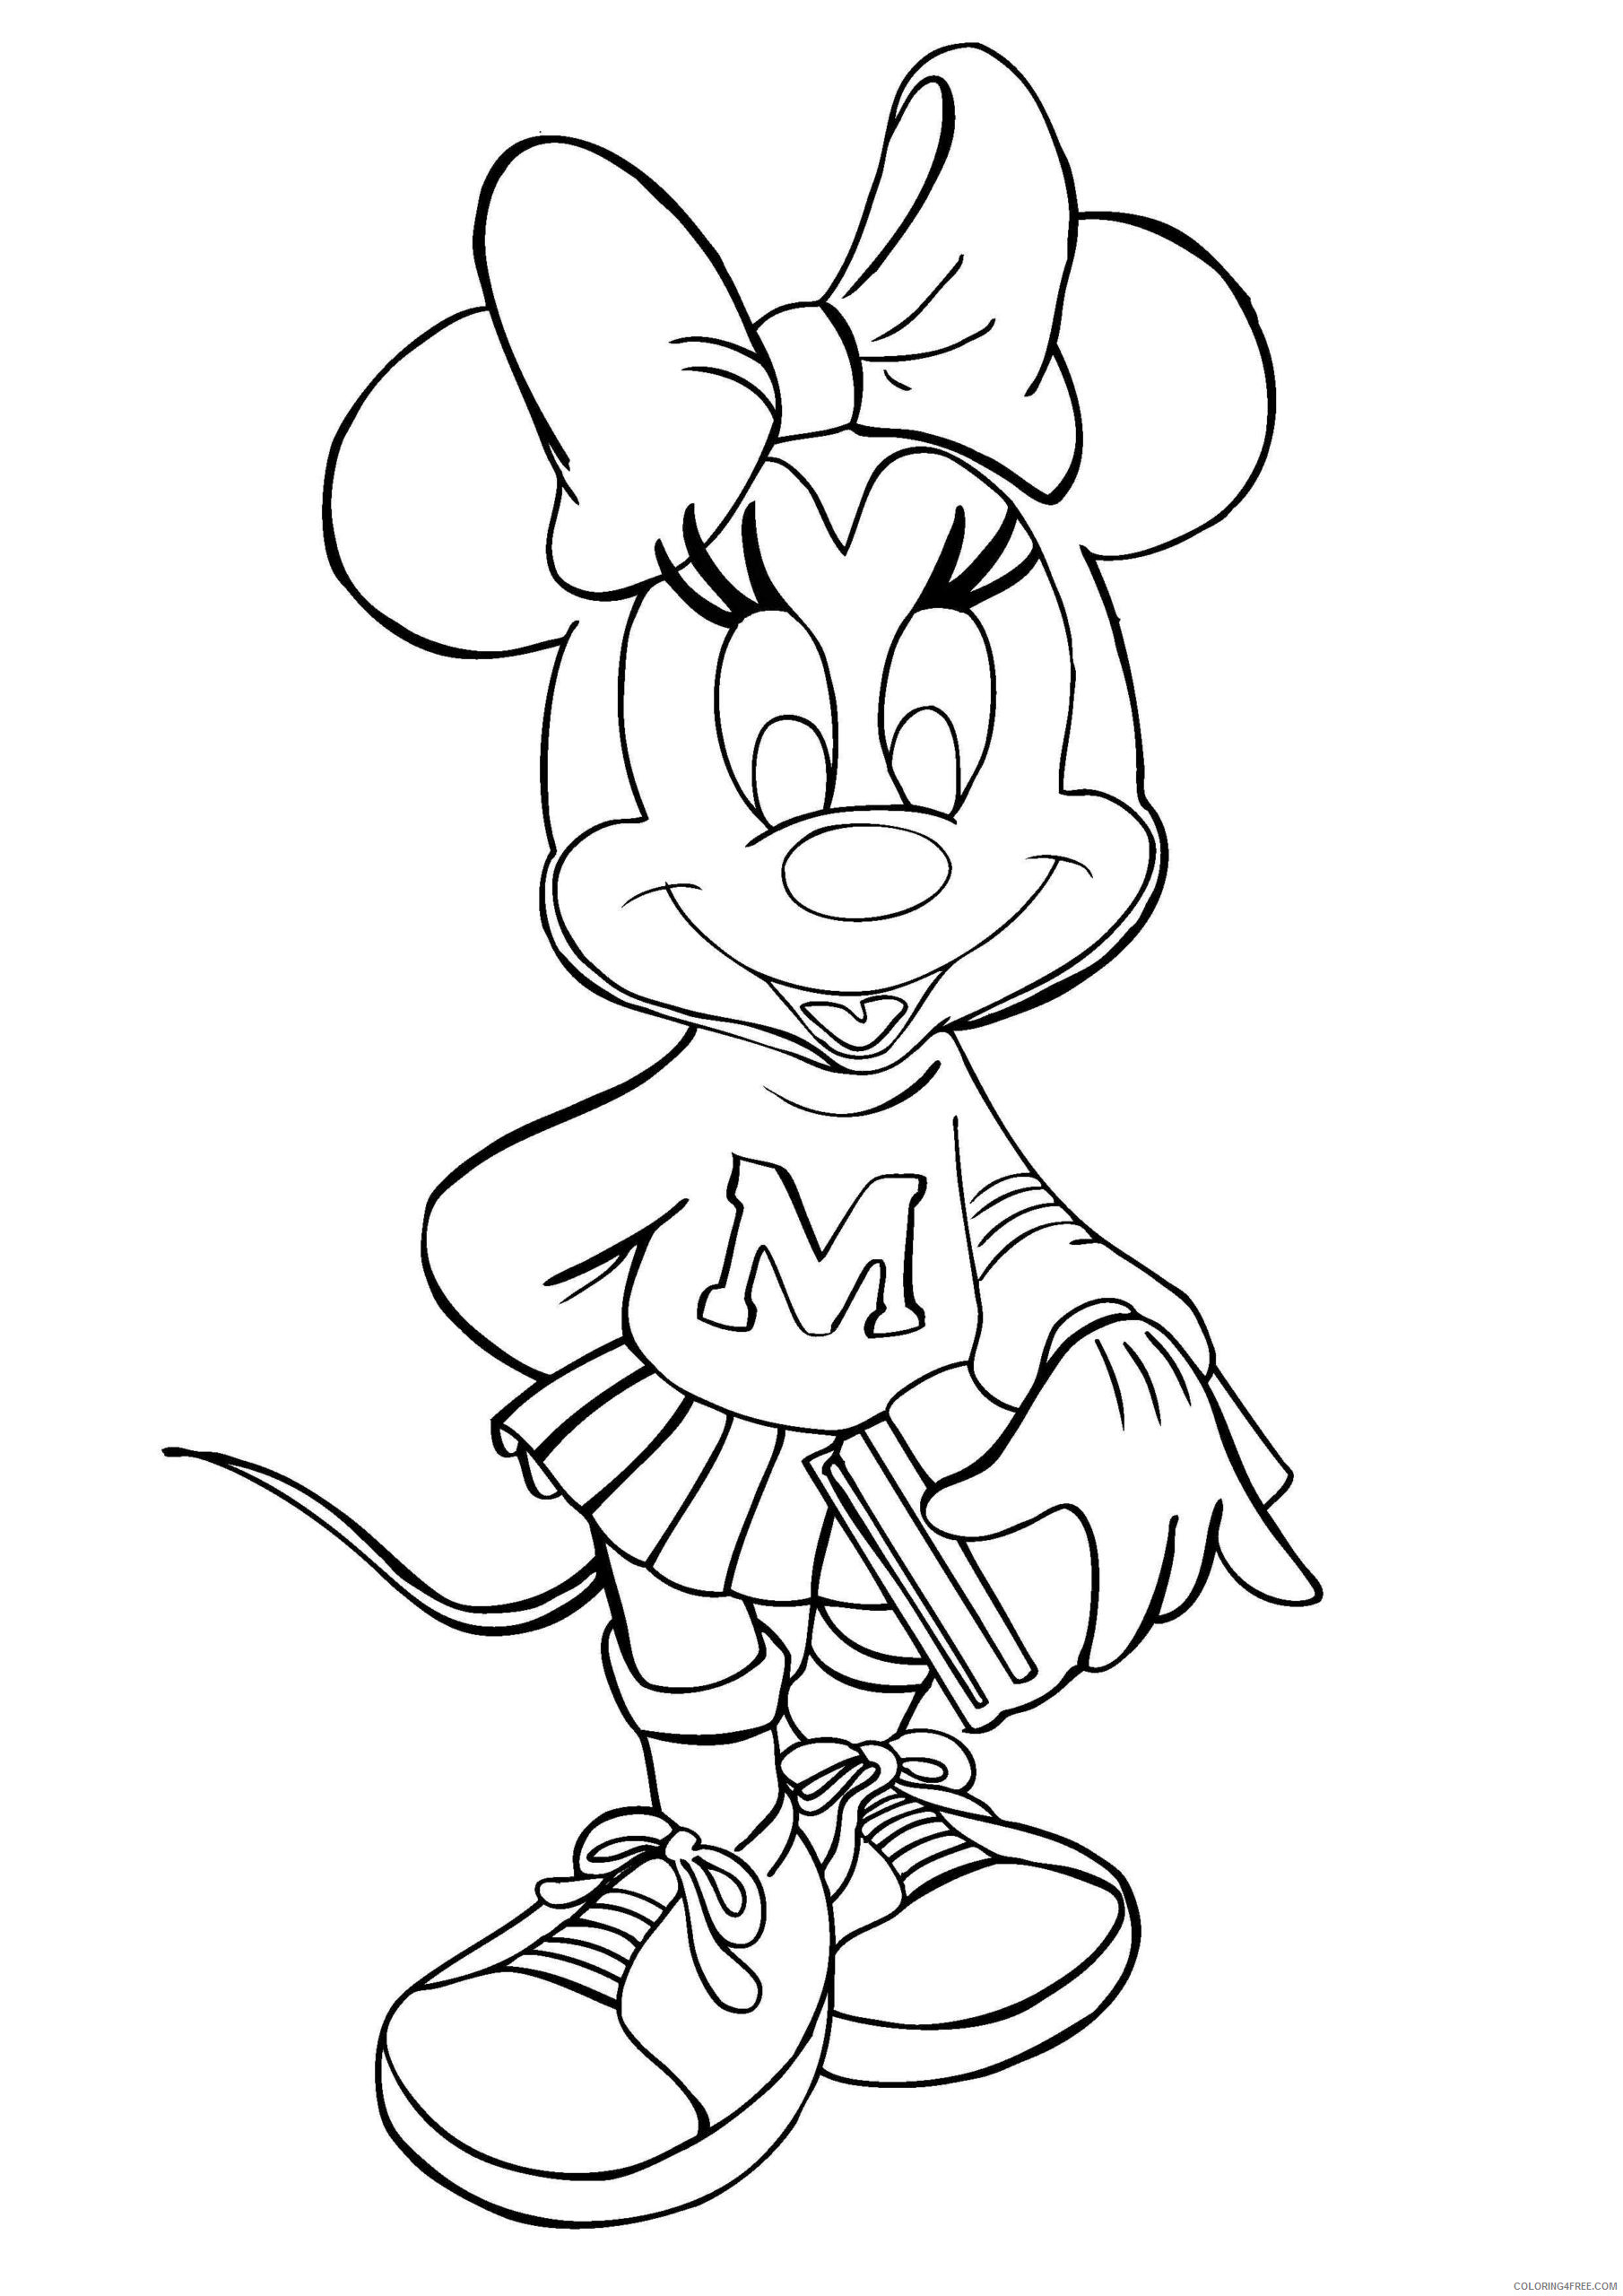 minnie-mouse-coloring-pages-cartoons-disney-minnie-mouse-printable-2020